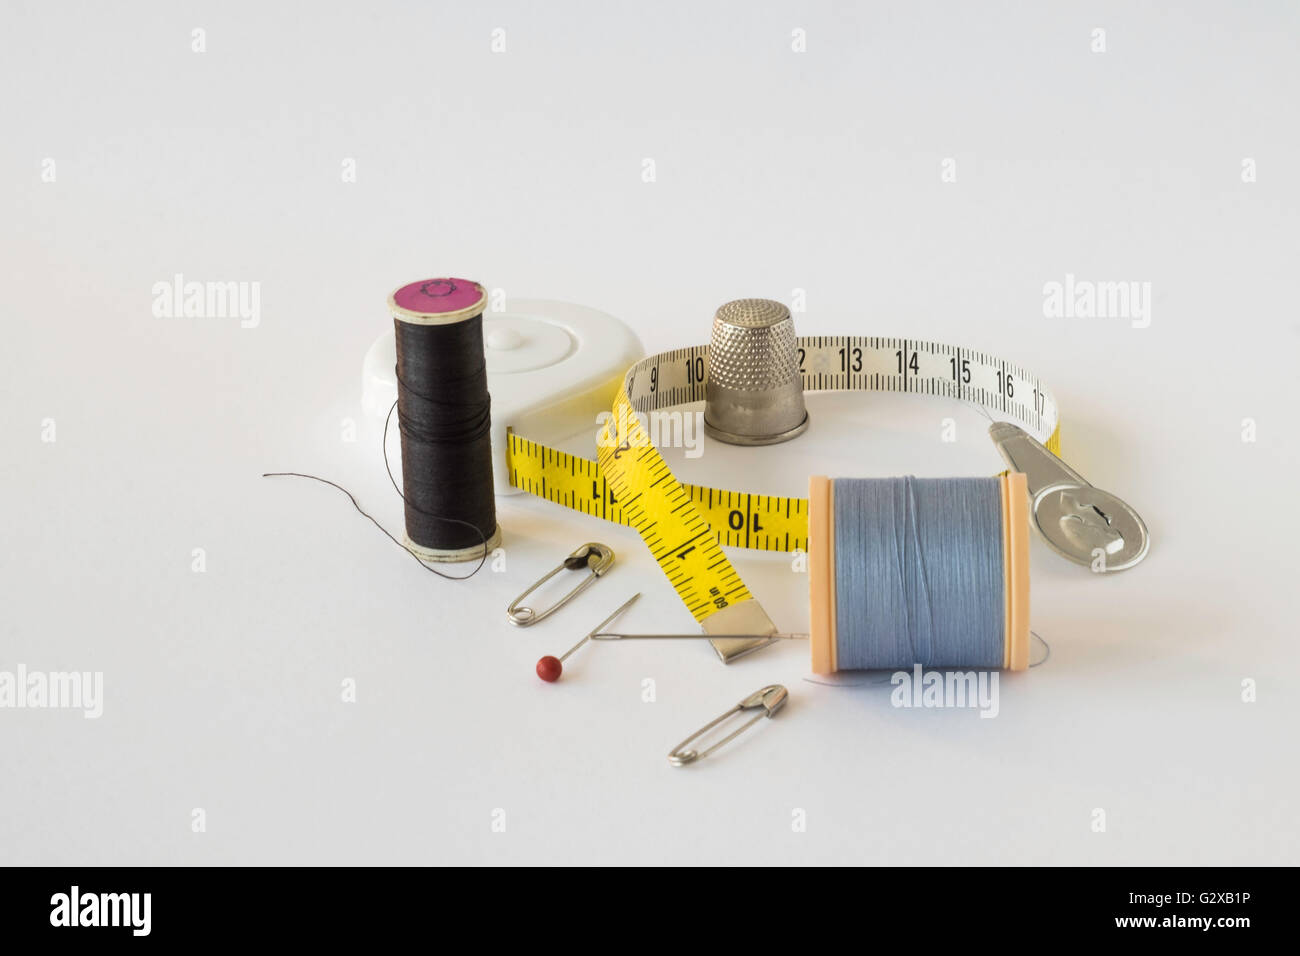 Collection of sewing accessories on white background Stock Photo